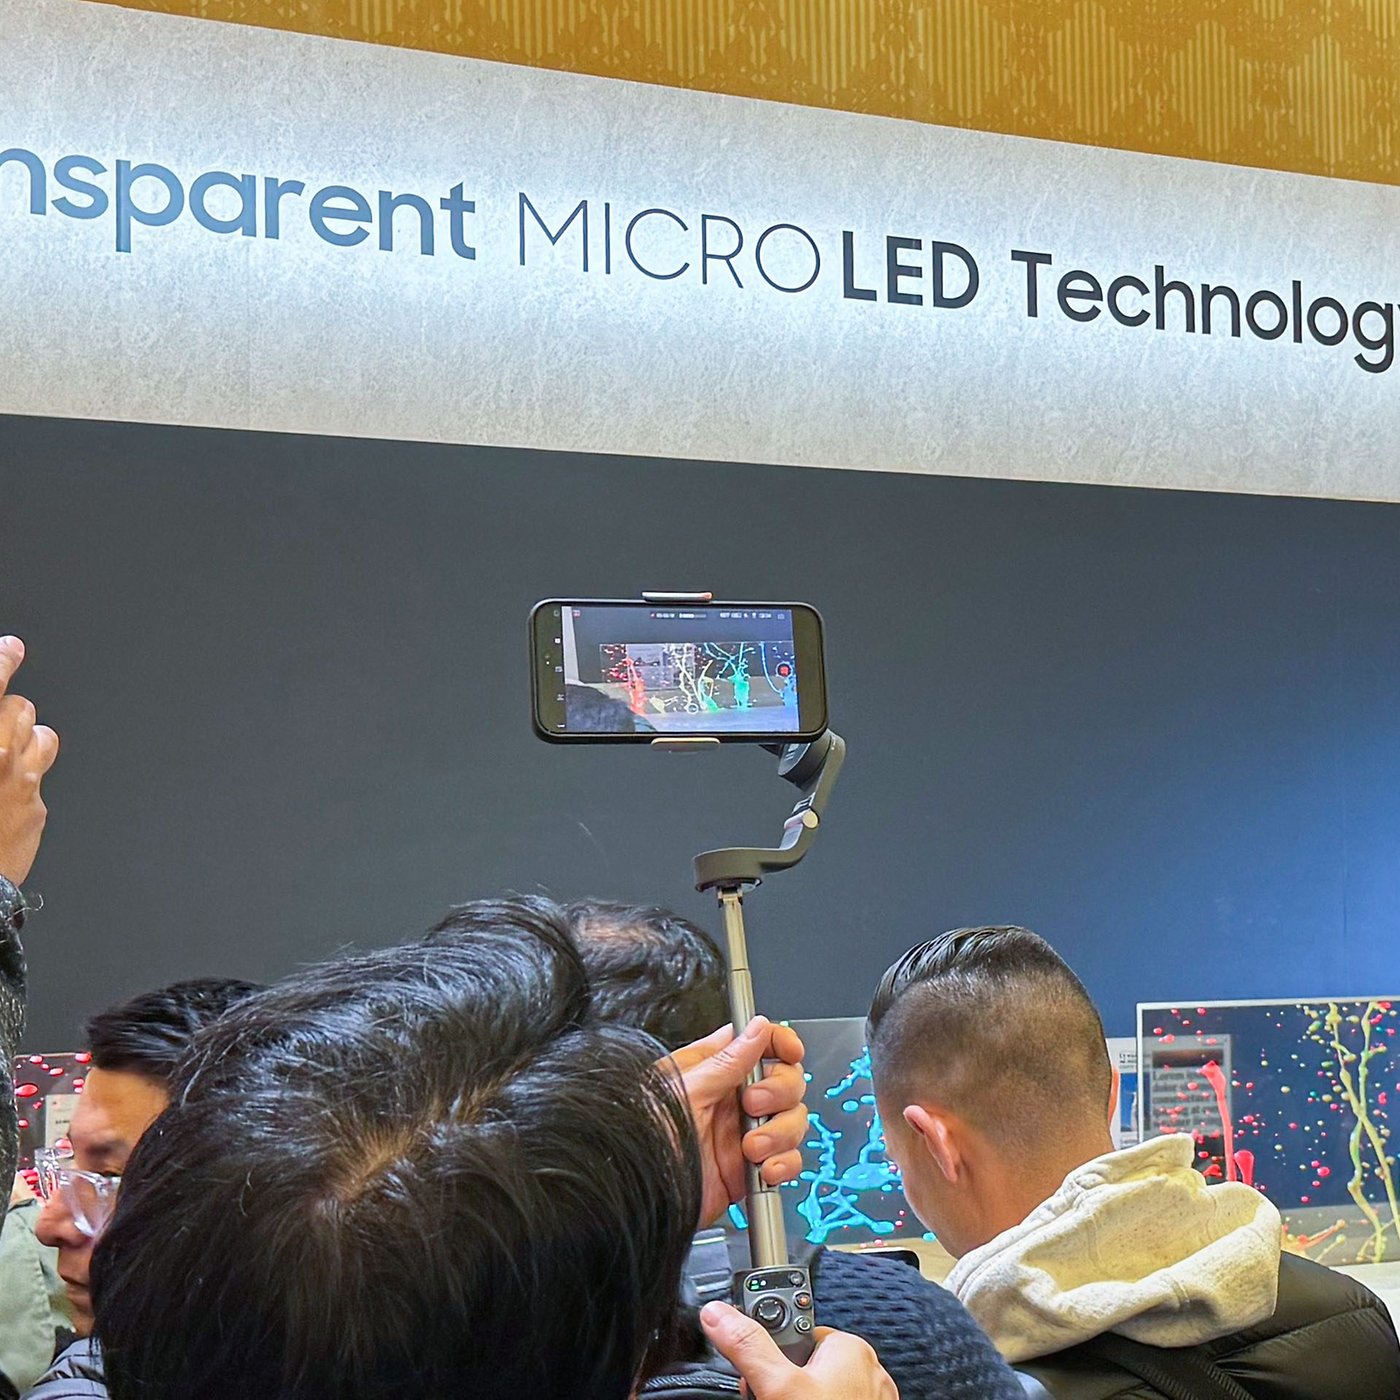 Samsung's Transparent micro LED TV: For Whom Exactly?